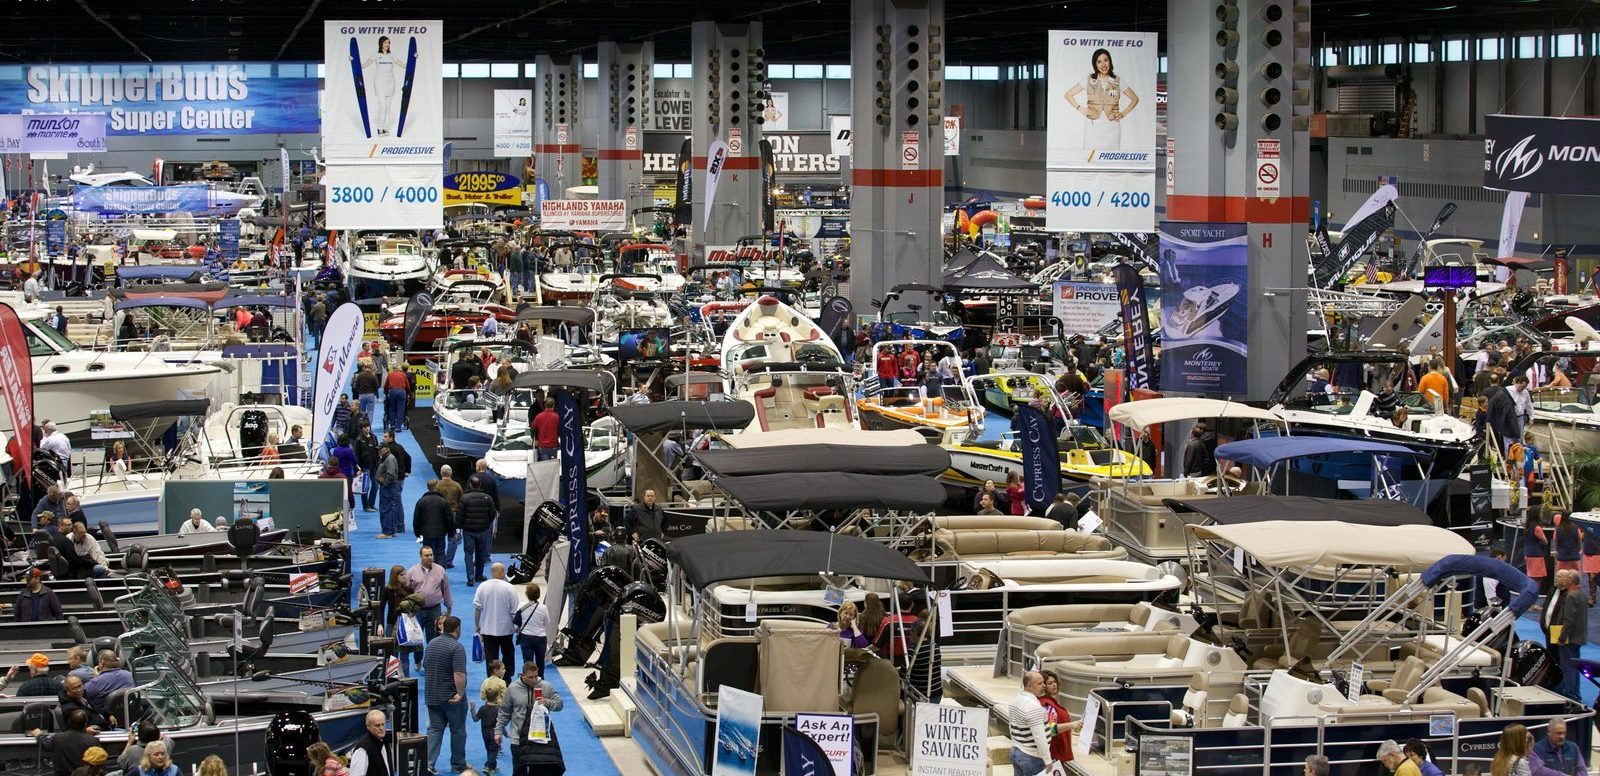 Discover Boating Chicago Boat Show makes return after hiatus Boating